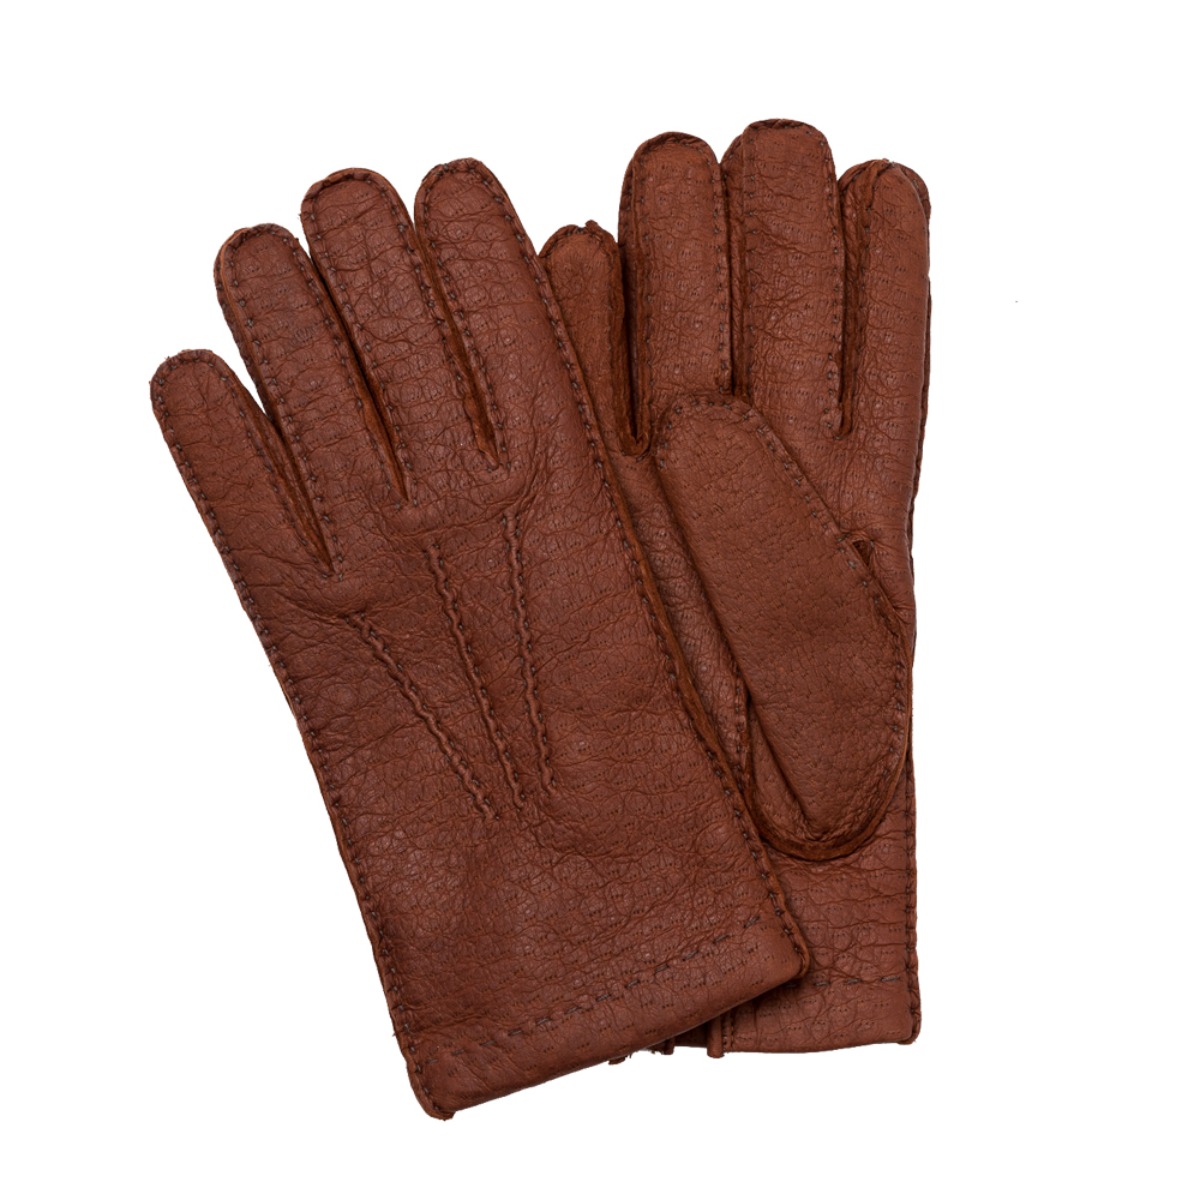 OMEGA GLOVES PECCARY LEATHER GLOVES GOLD